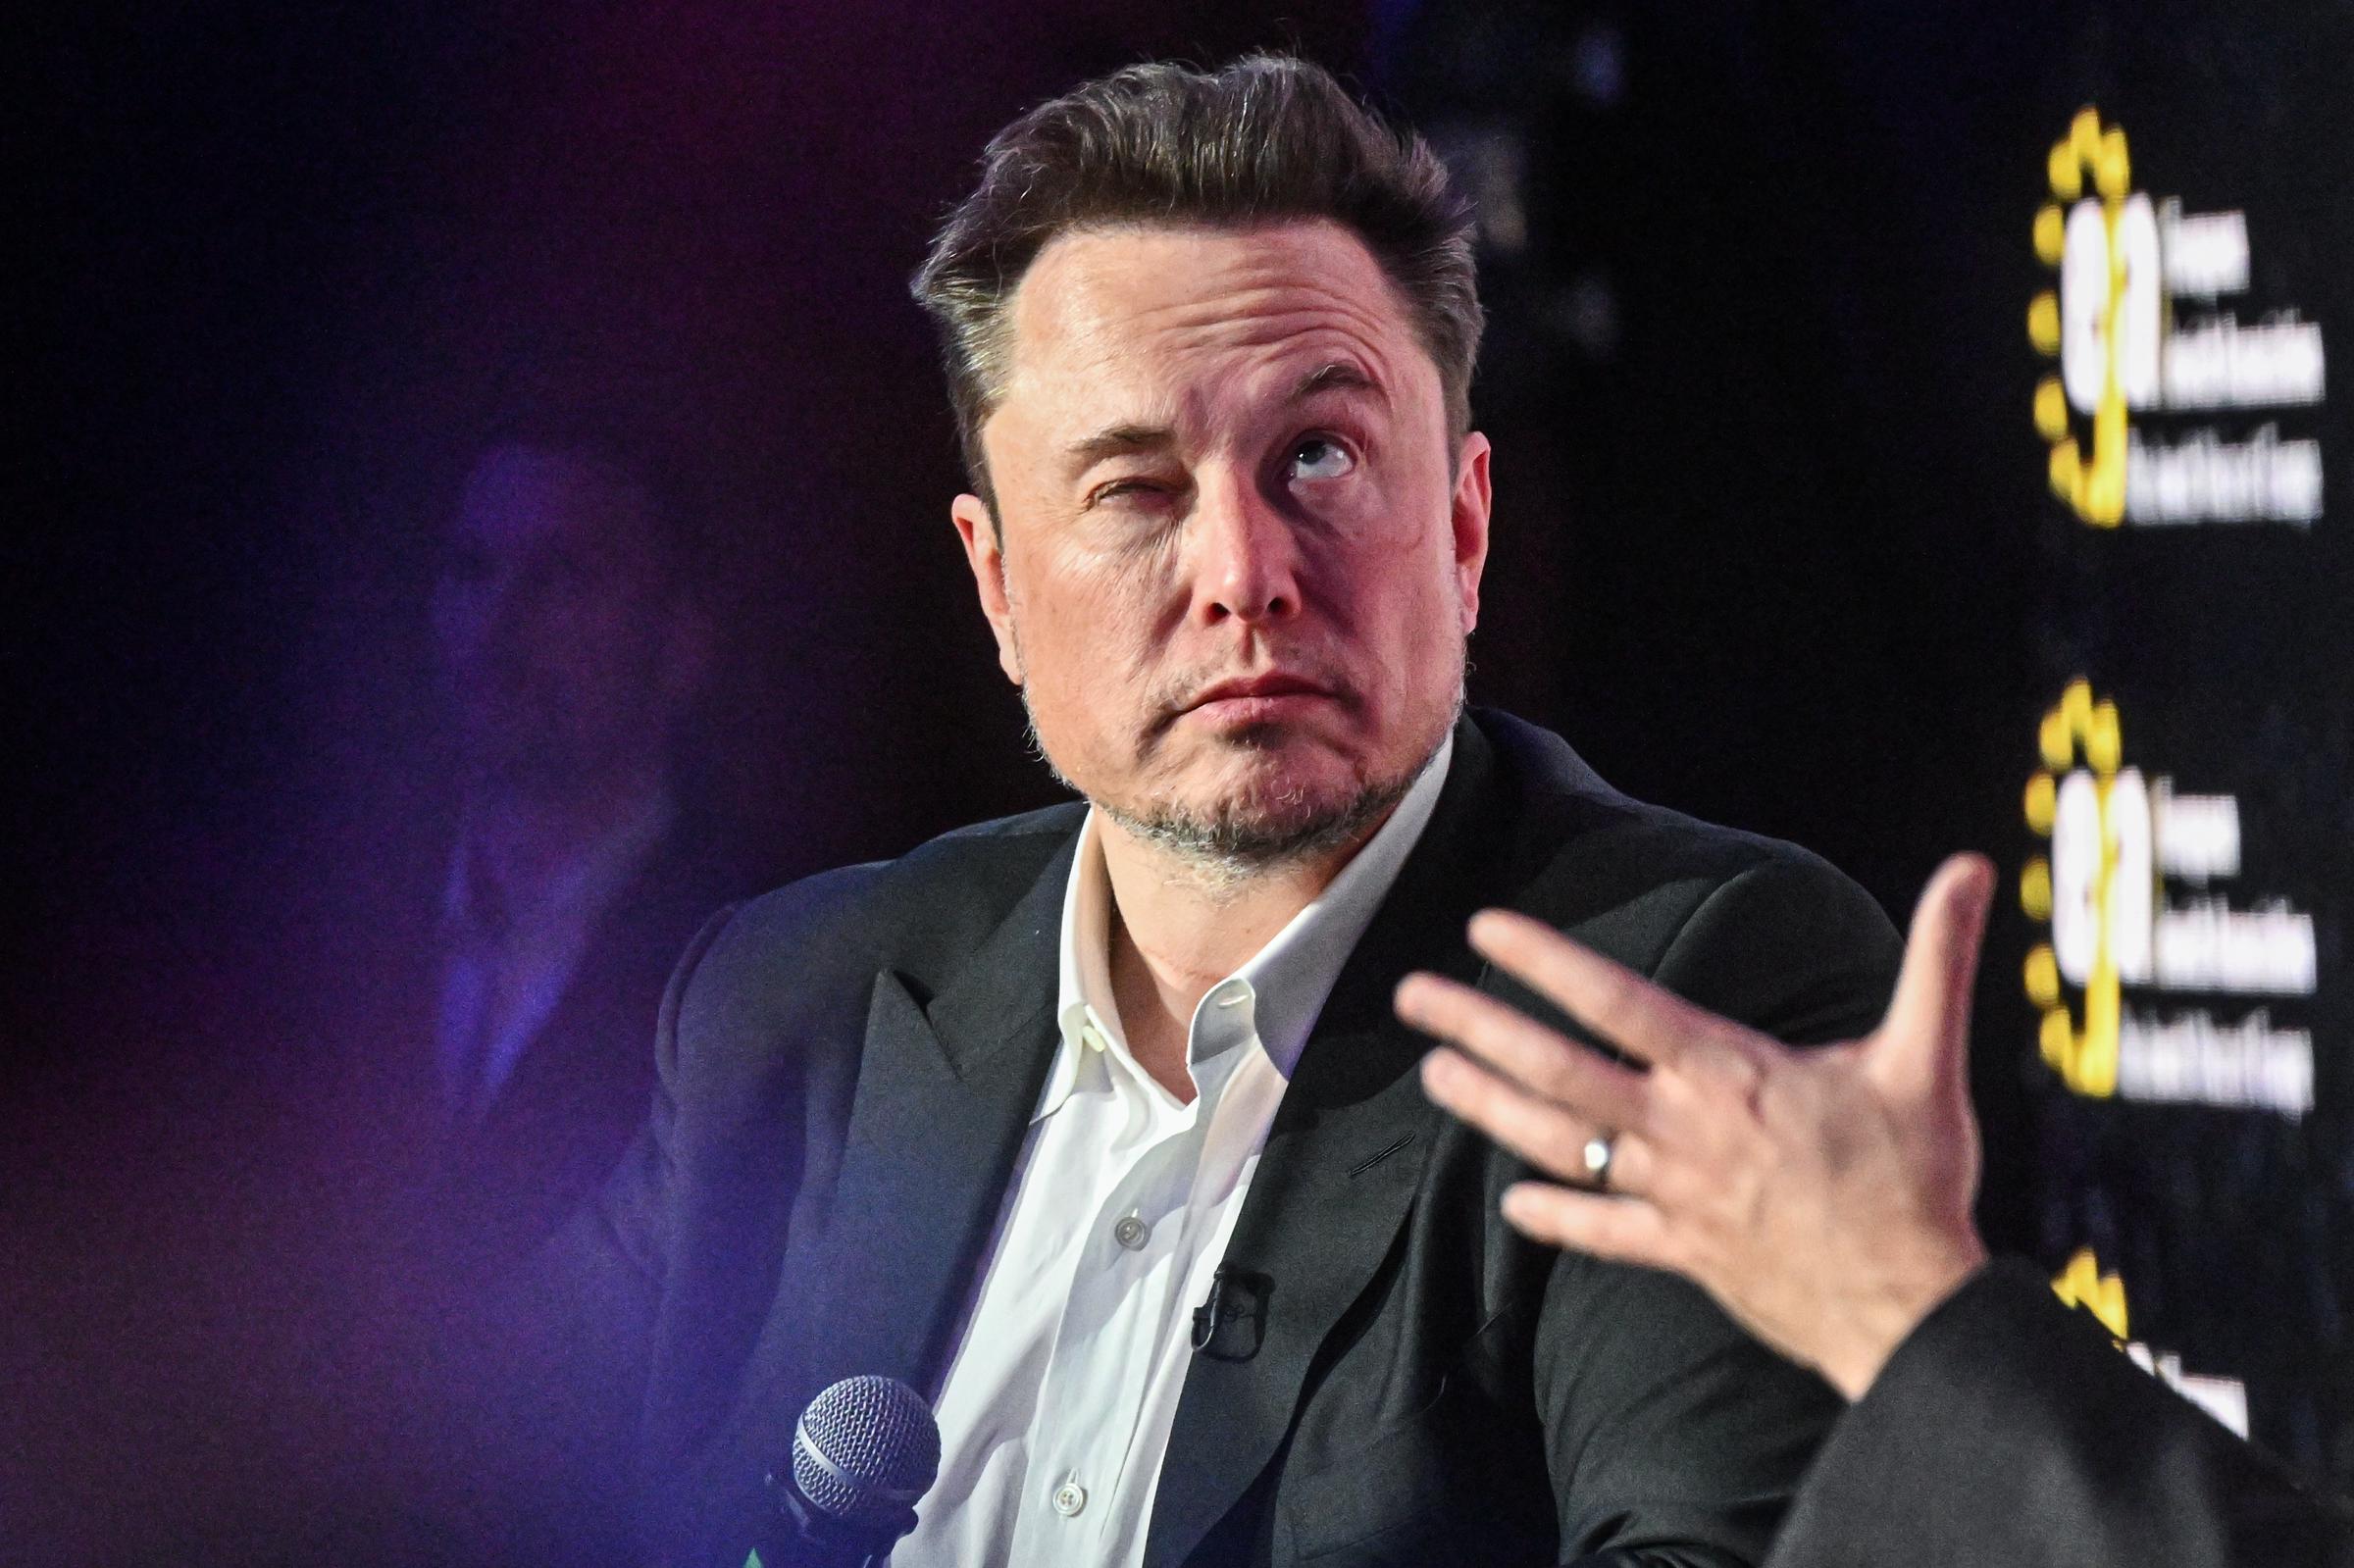 Elon Musk during live interview with Ben Shapiro at the symposium on fighting antisemitism in Krakow, Poland on January 22, 2024 | Source: Getty Images